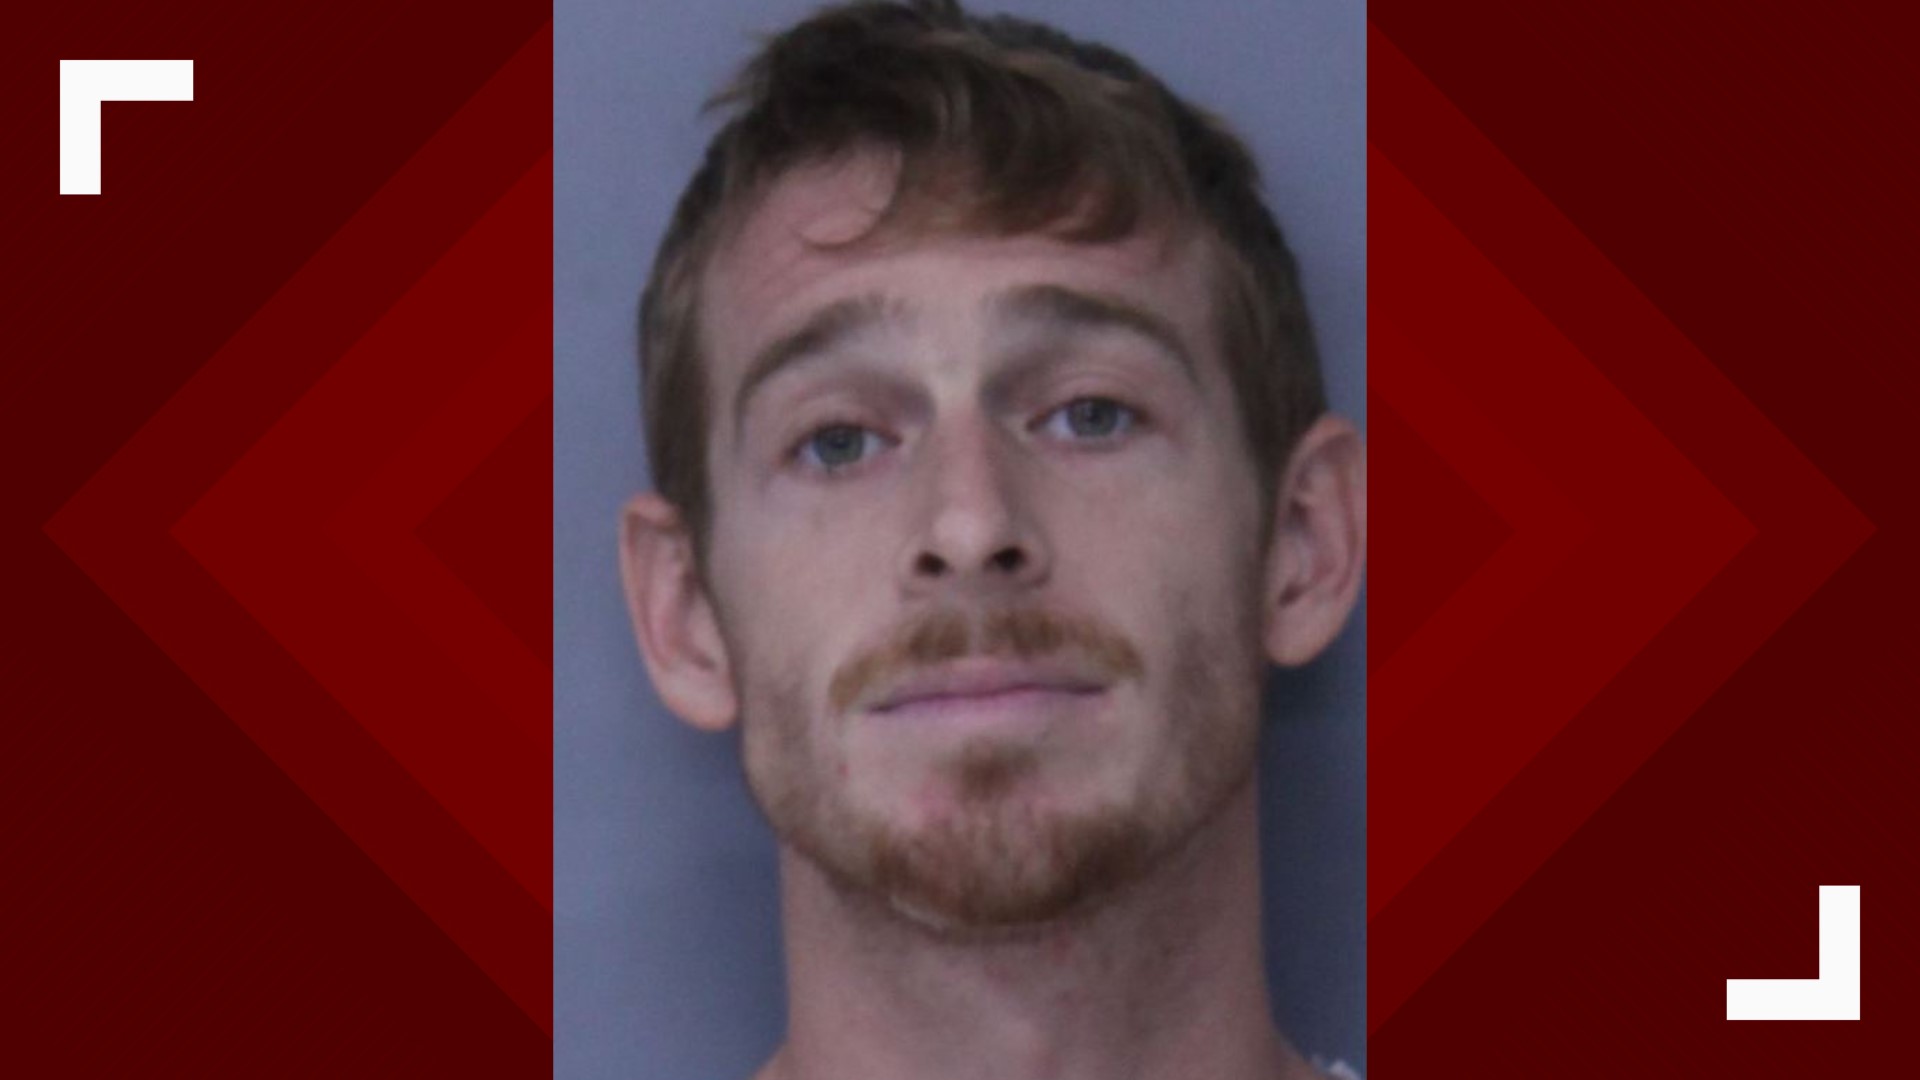 Third suspect arrested in St. Johns County home invasion involving